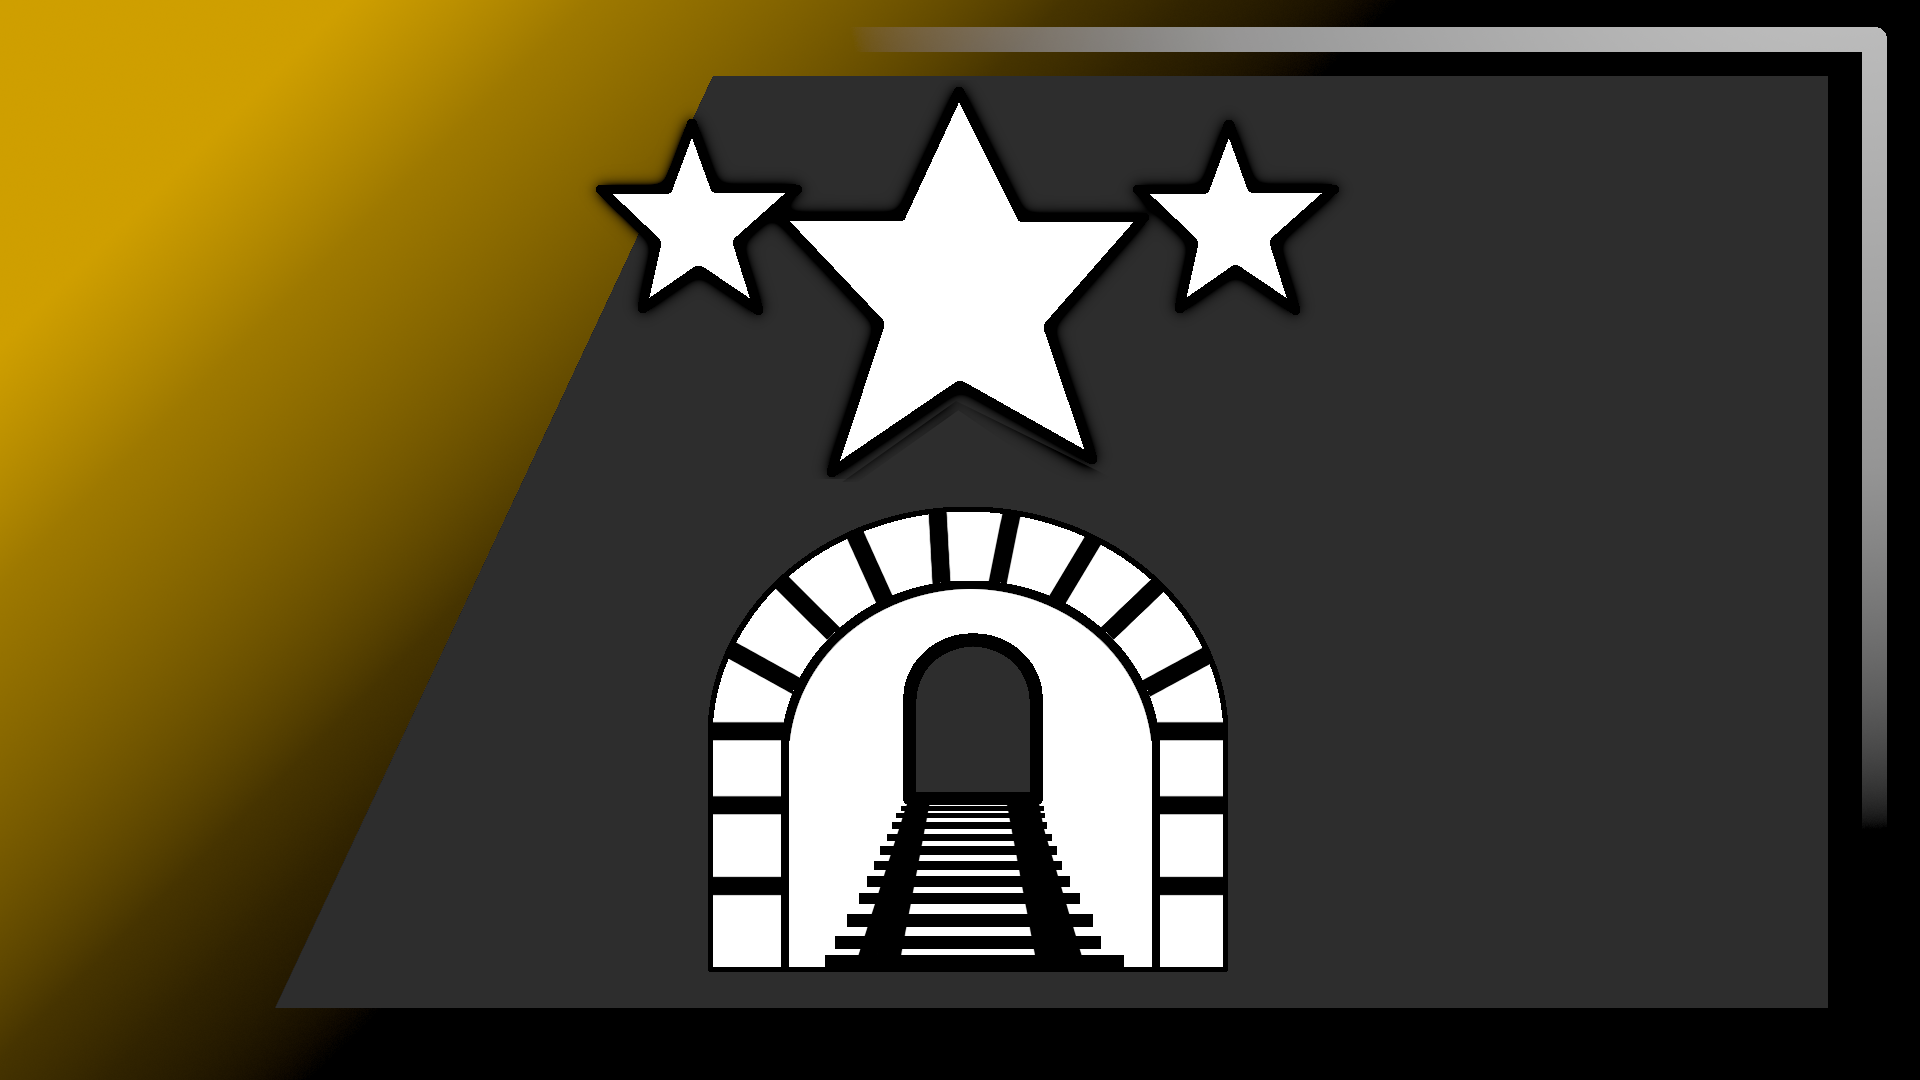 Icon for Master of Highland Tunnel